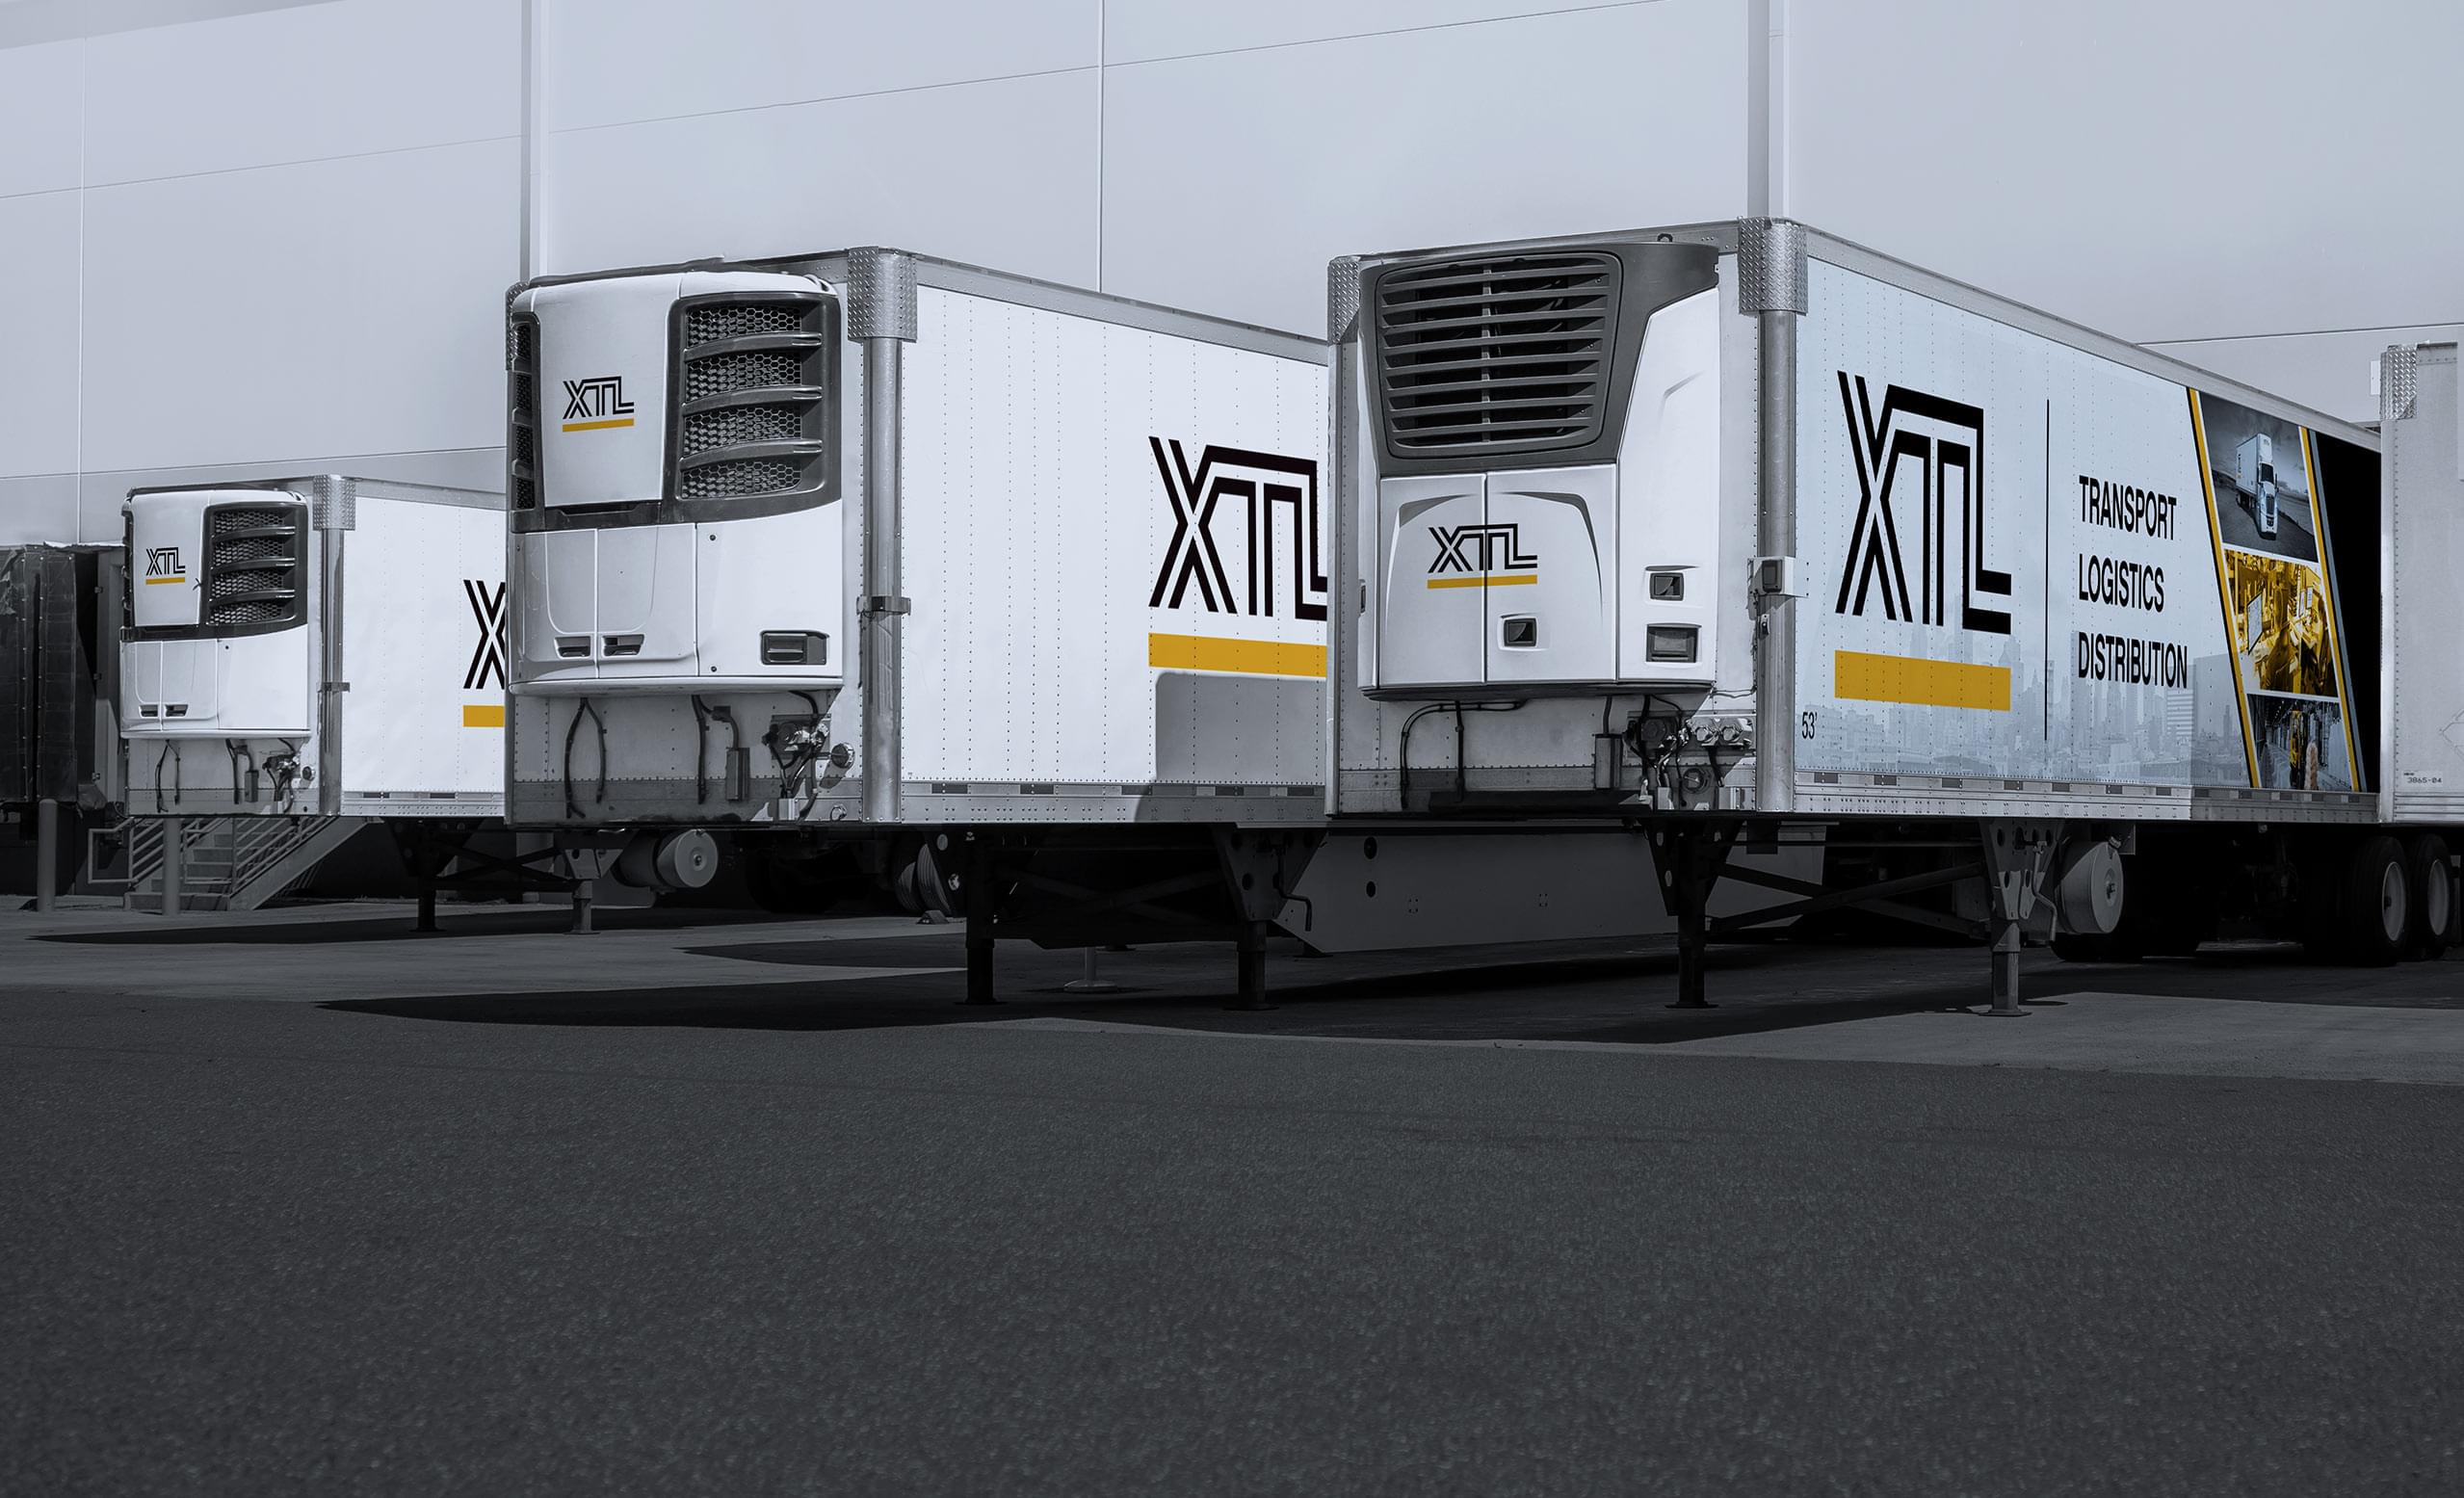 Multiple XTL refrigerated trailers backed into a crossdocking, warehouse facility